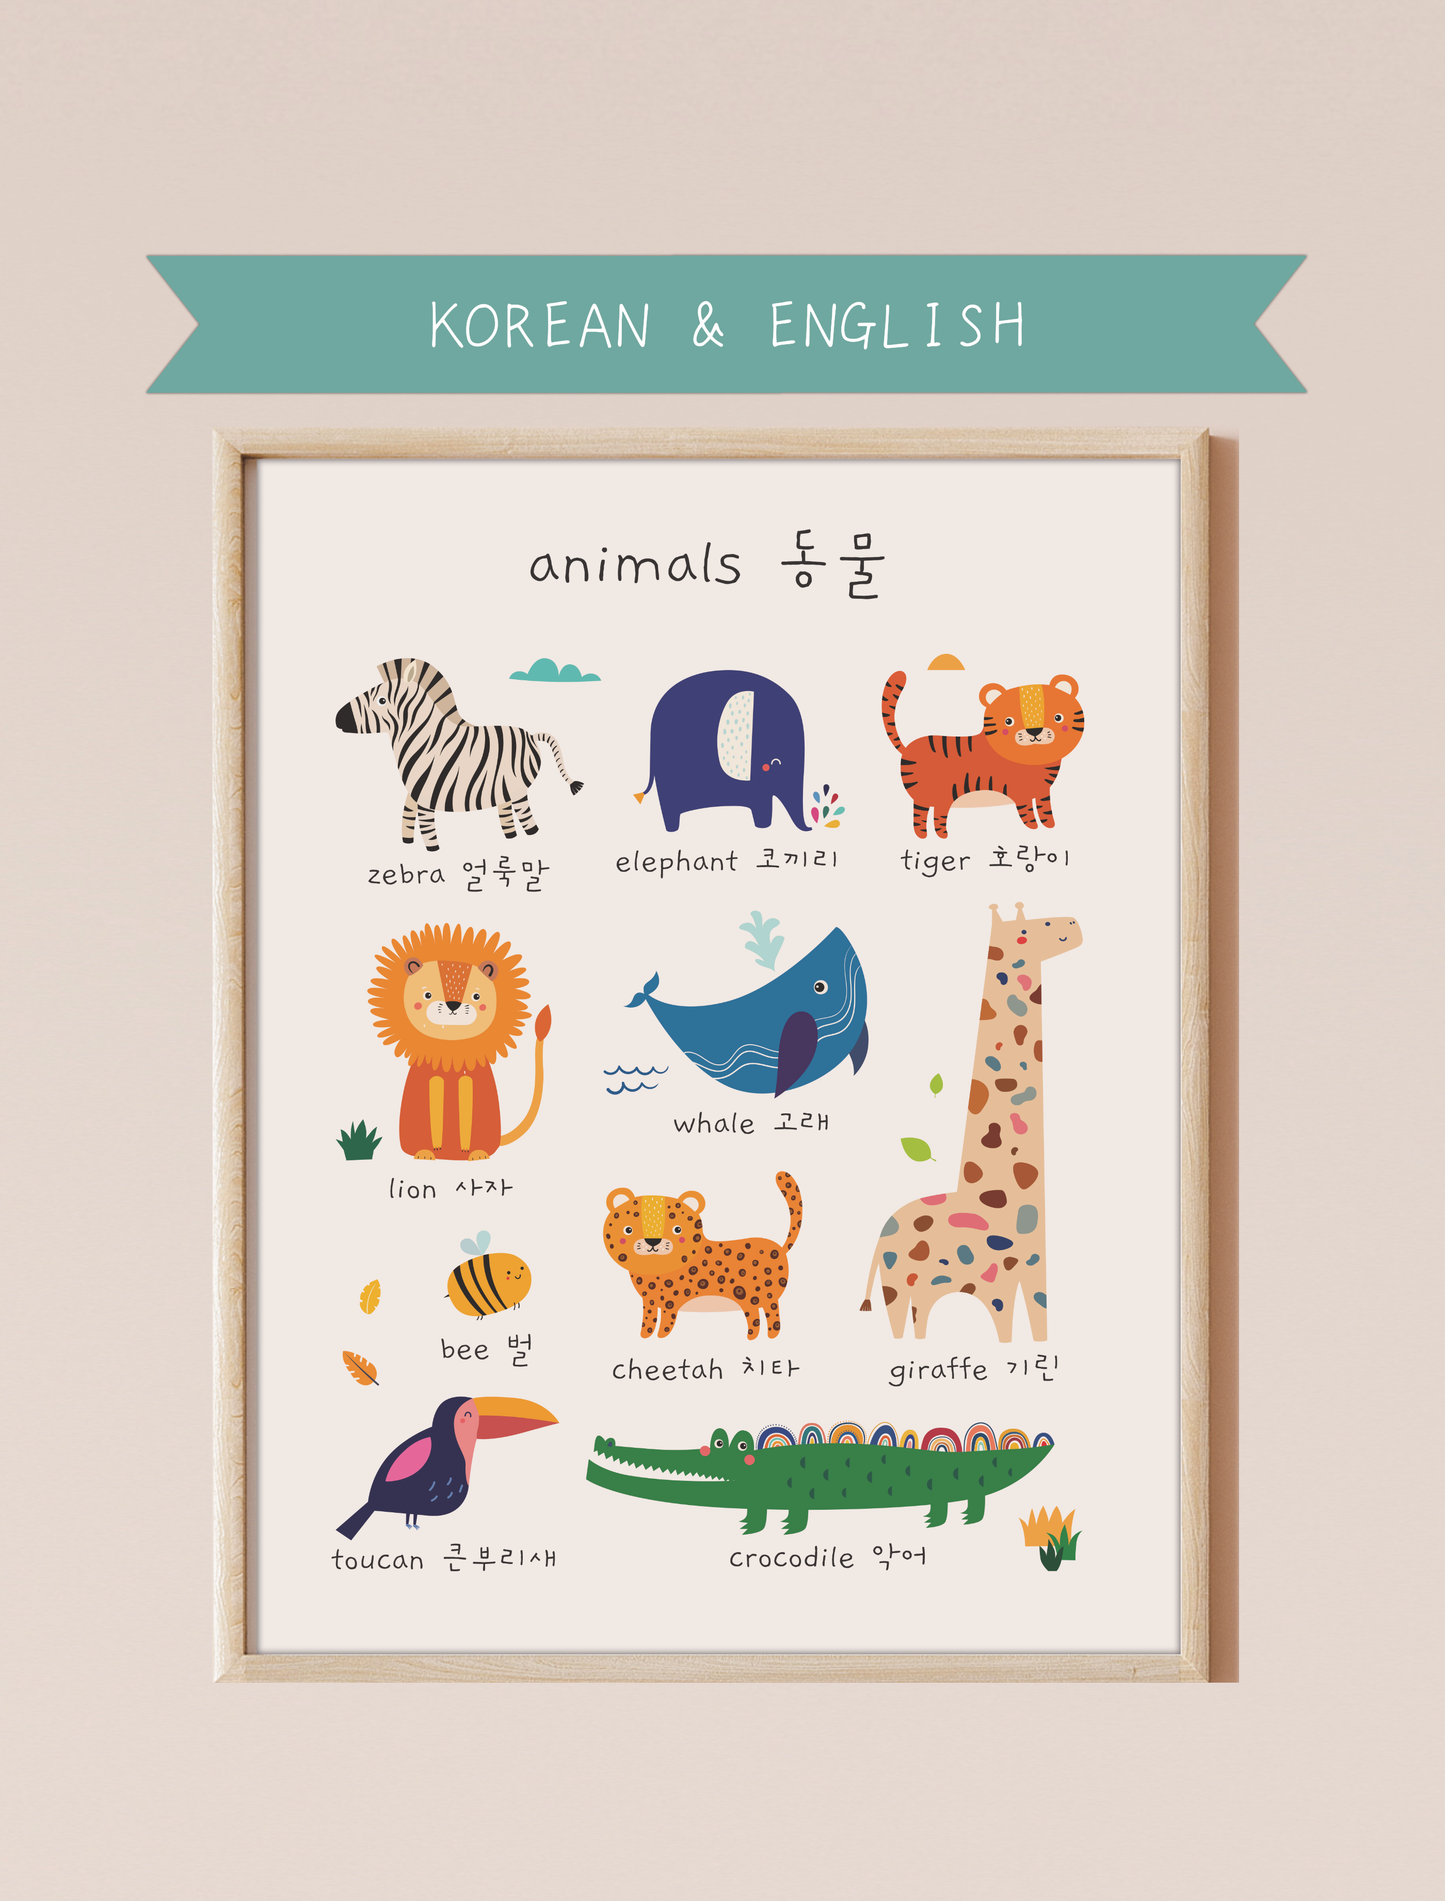 A bilingual educational print featuring animals labeled in English and Korean. The print displays cute, colorful illustrations of the following animals: zebra, elephant, tiger, lion, whale, bee, cheetah, giraffe toucan, and crocodile . This bilingual display aids in language acquisition and cross-cultural learning.